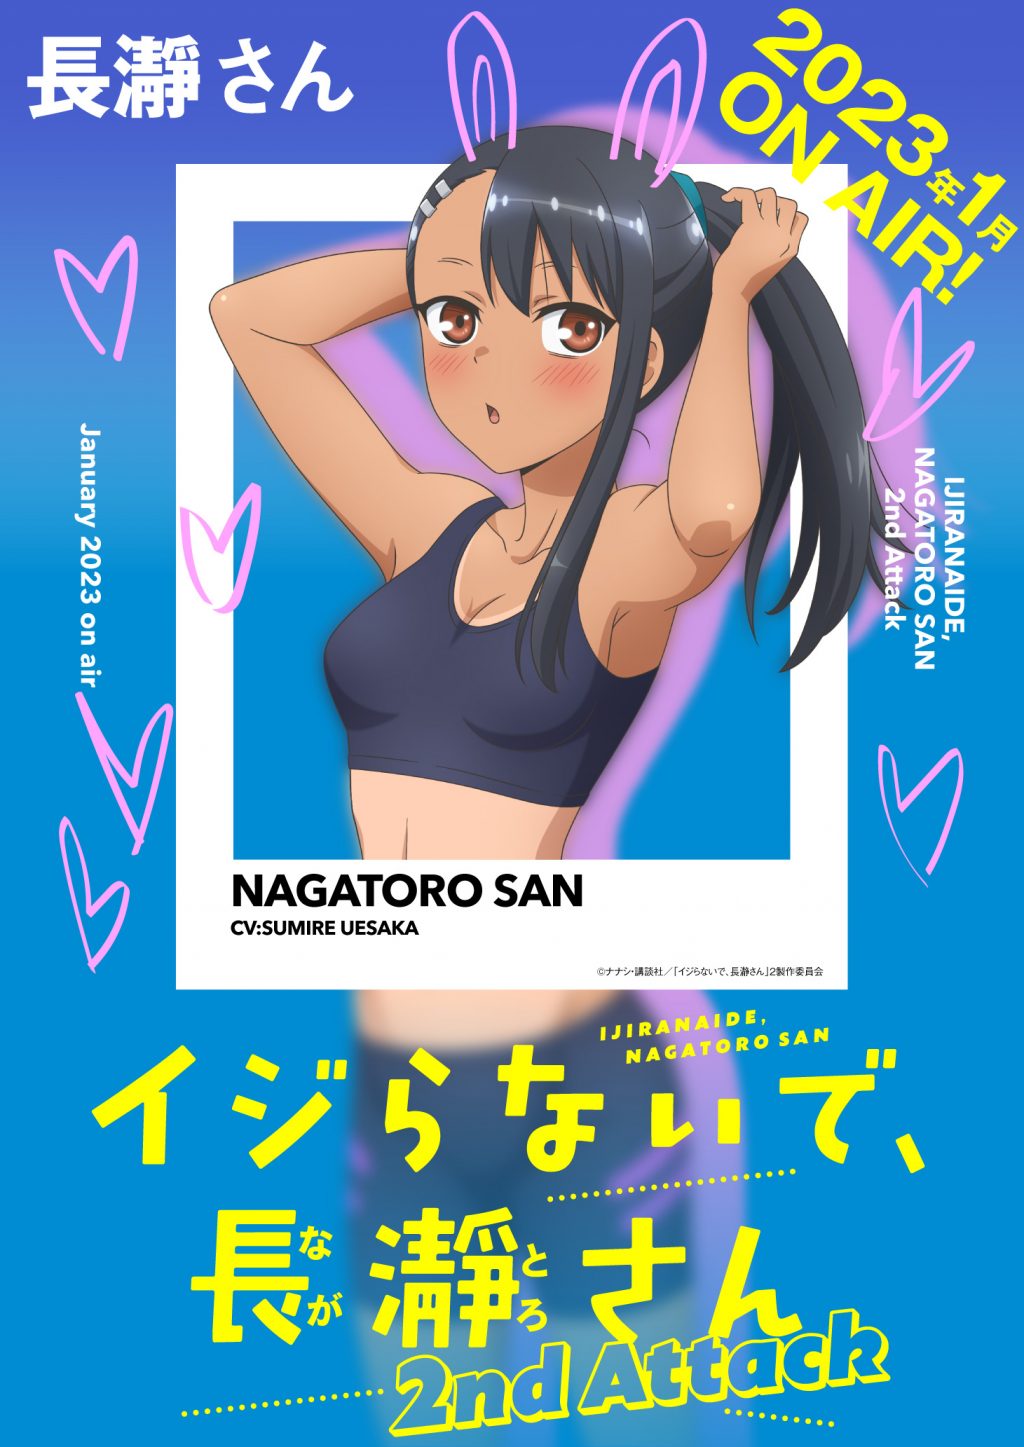 Watch Don't Toy With Me, Miss Nagatoro season 2 episode 2 streaming online